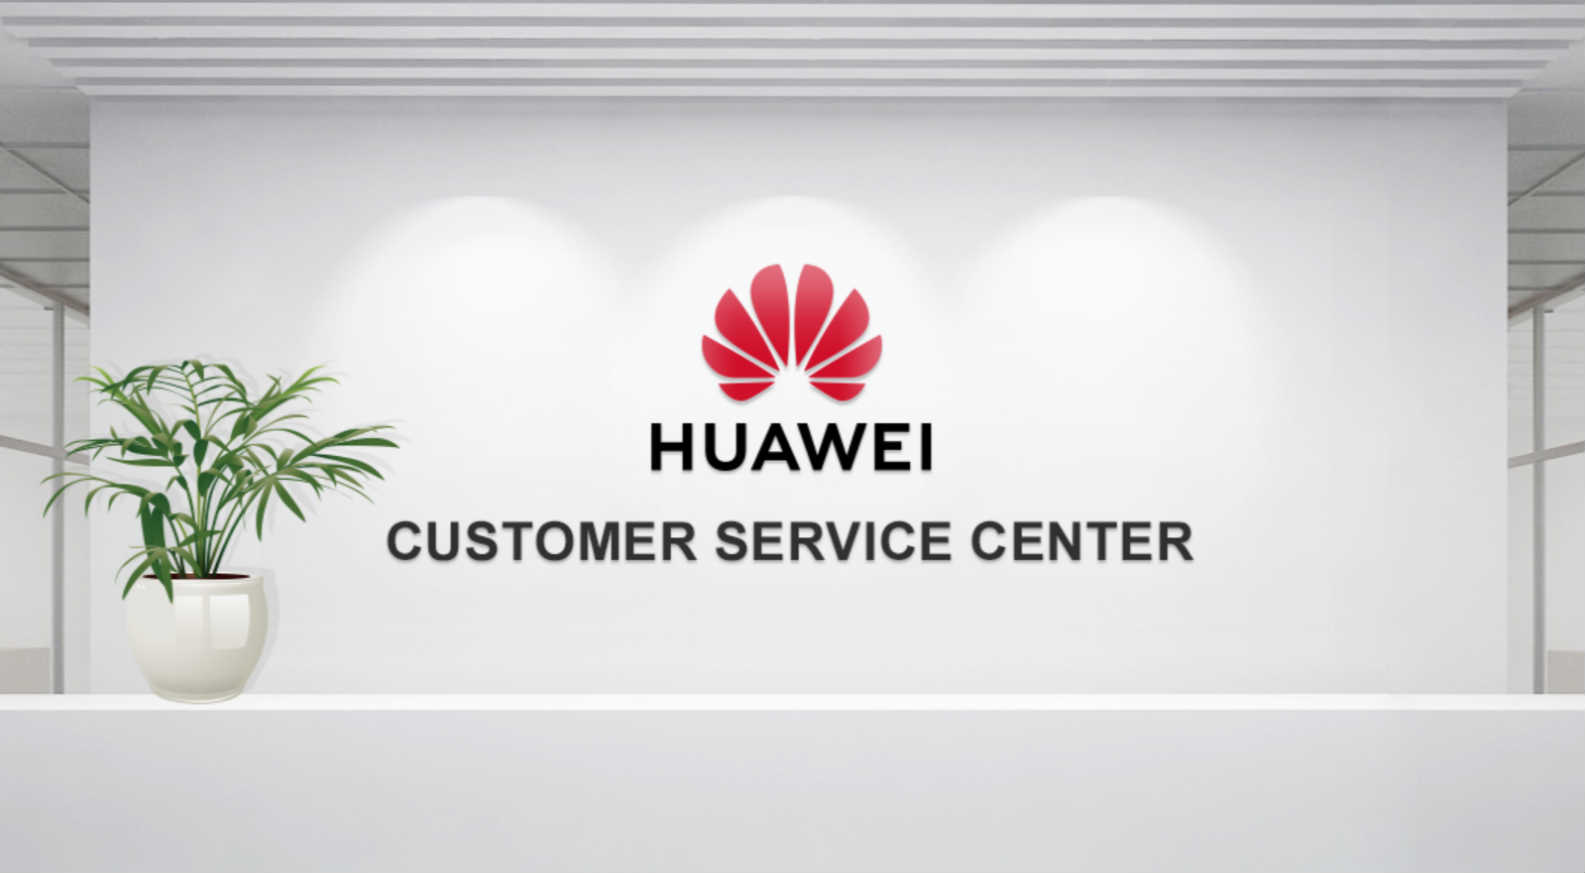 HUAWEI Service Center】 - HUAWEI Support - HUAWEI Official Site